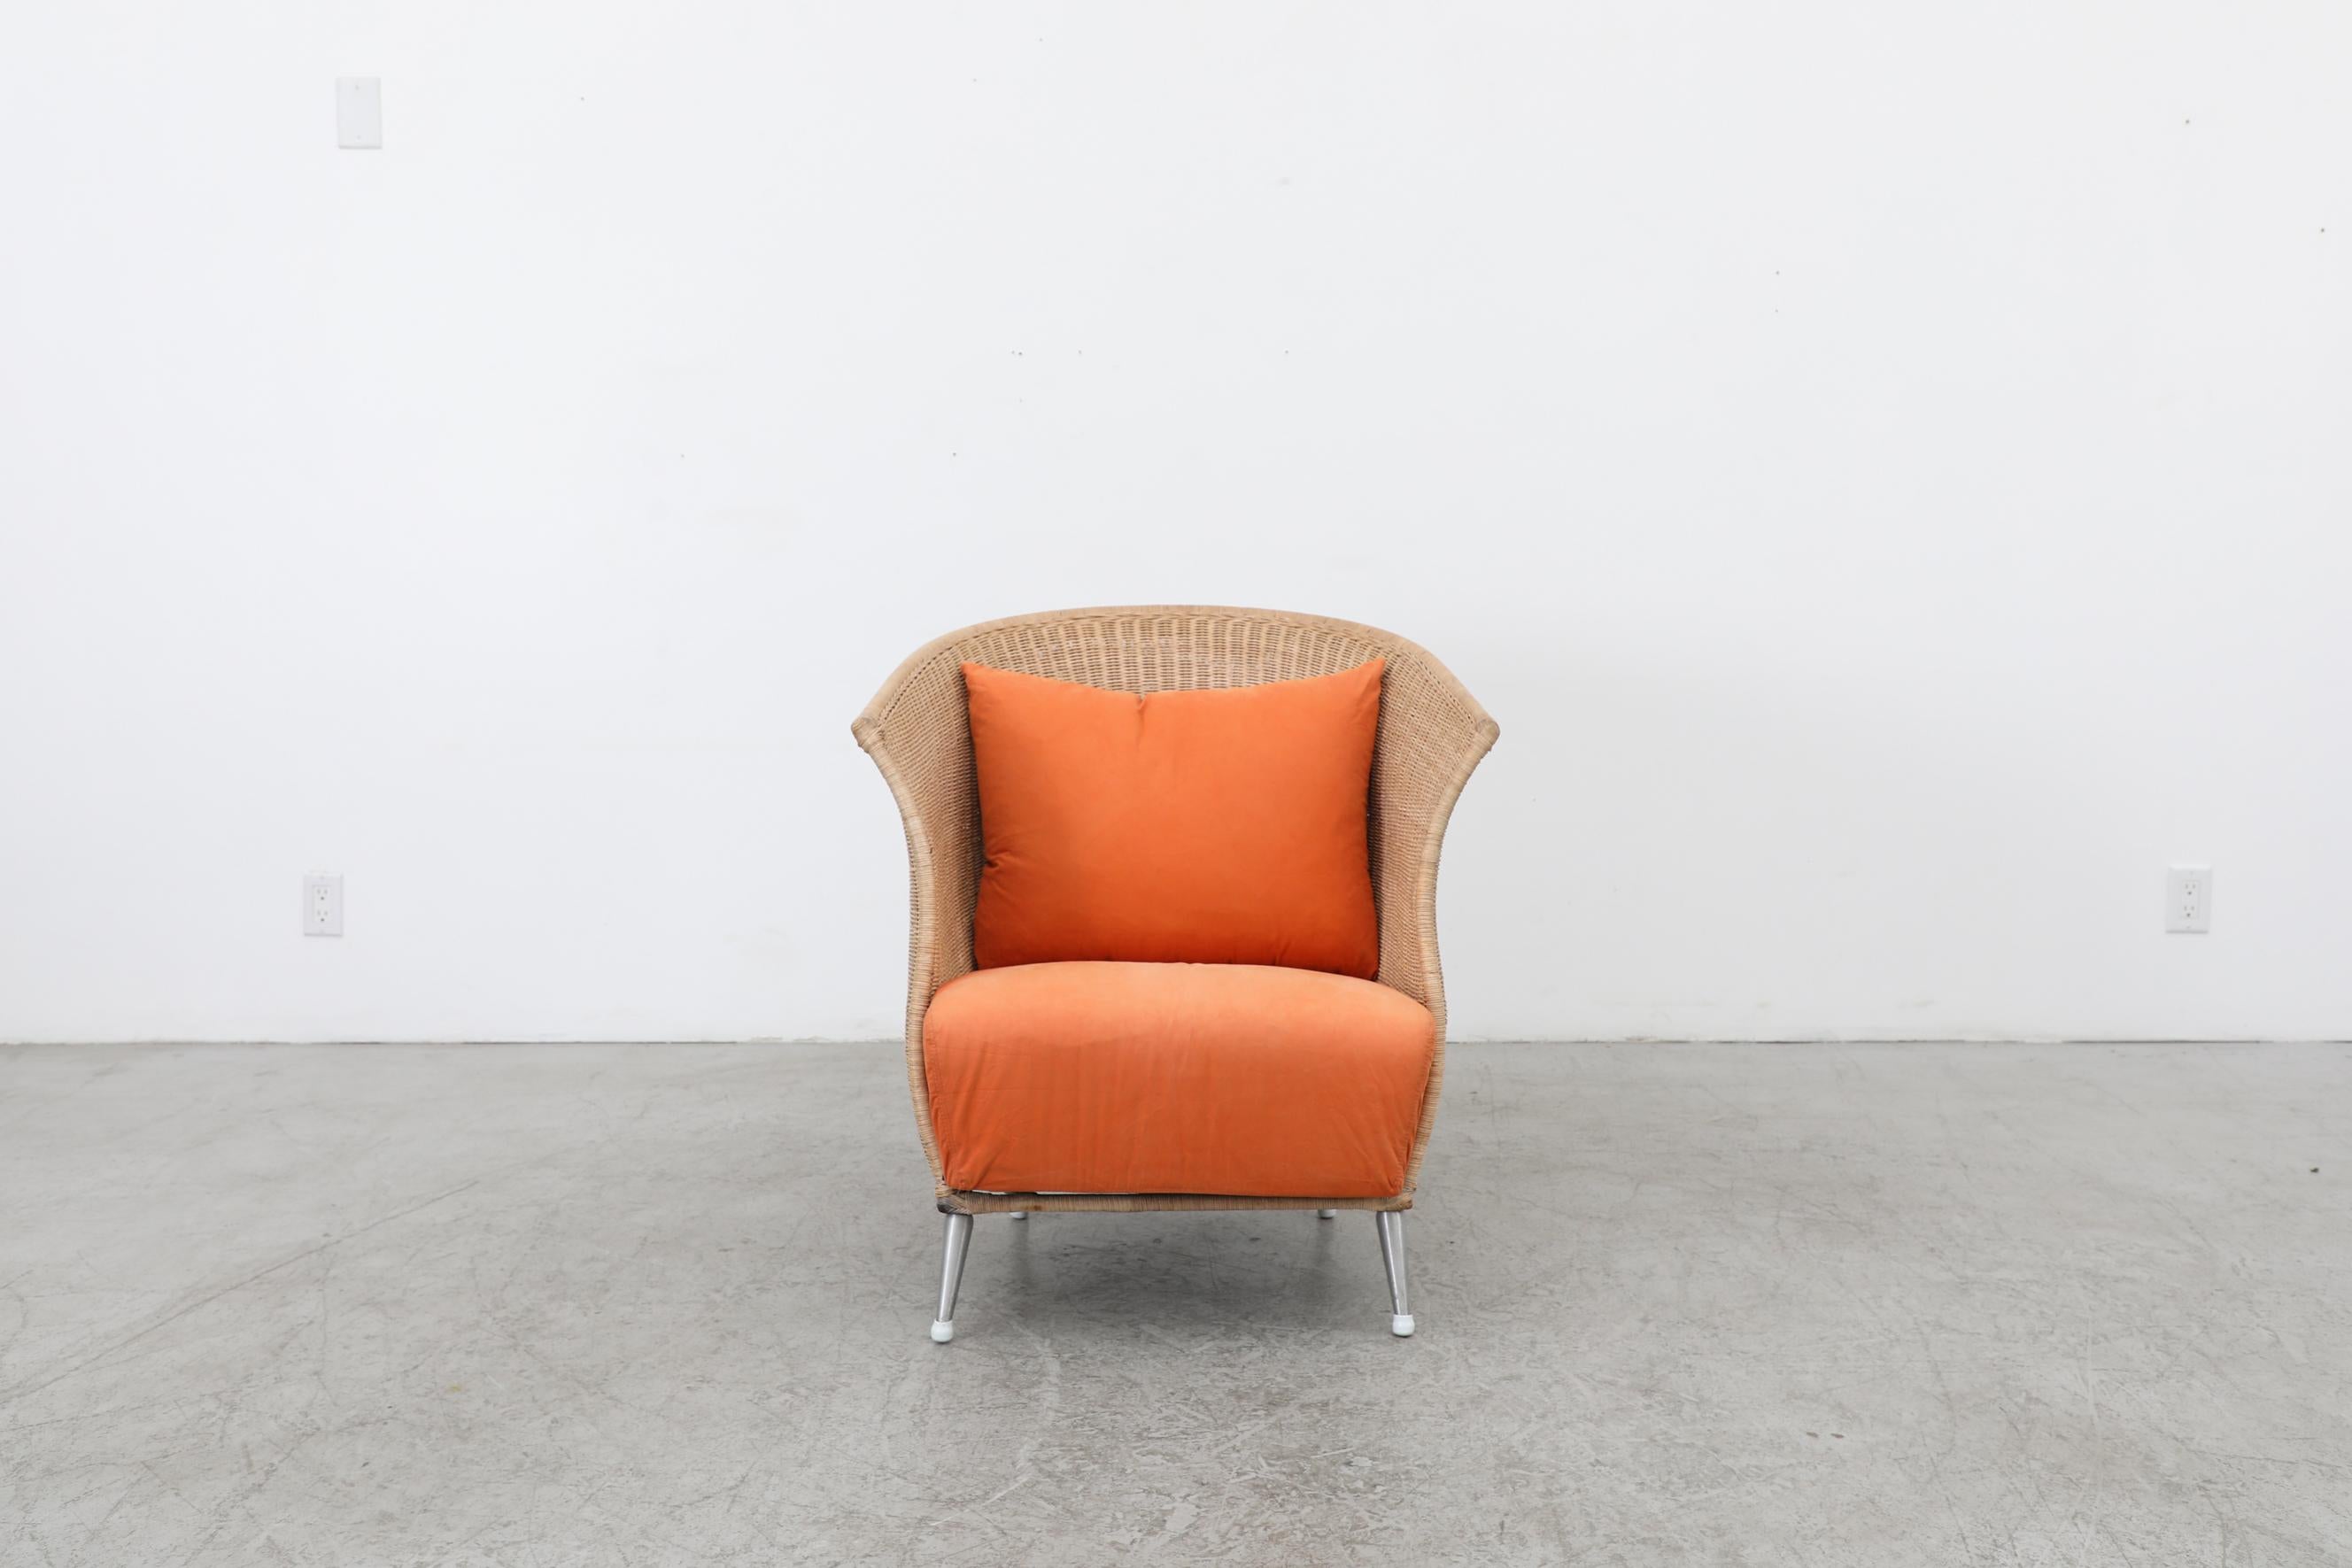 Ligne Roset rattan lounge chair with orange cushion. In original condition with normal wear for its age and use. There is some rattan breakage on the back and fading to the rattan on the interior. The seat width is 22.5